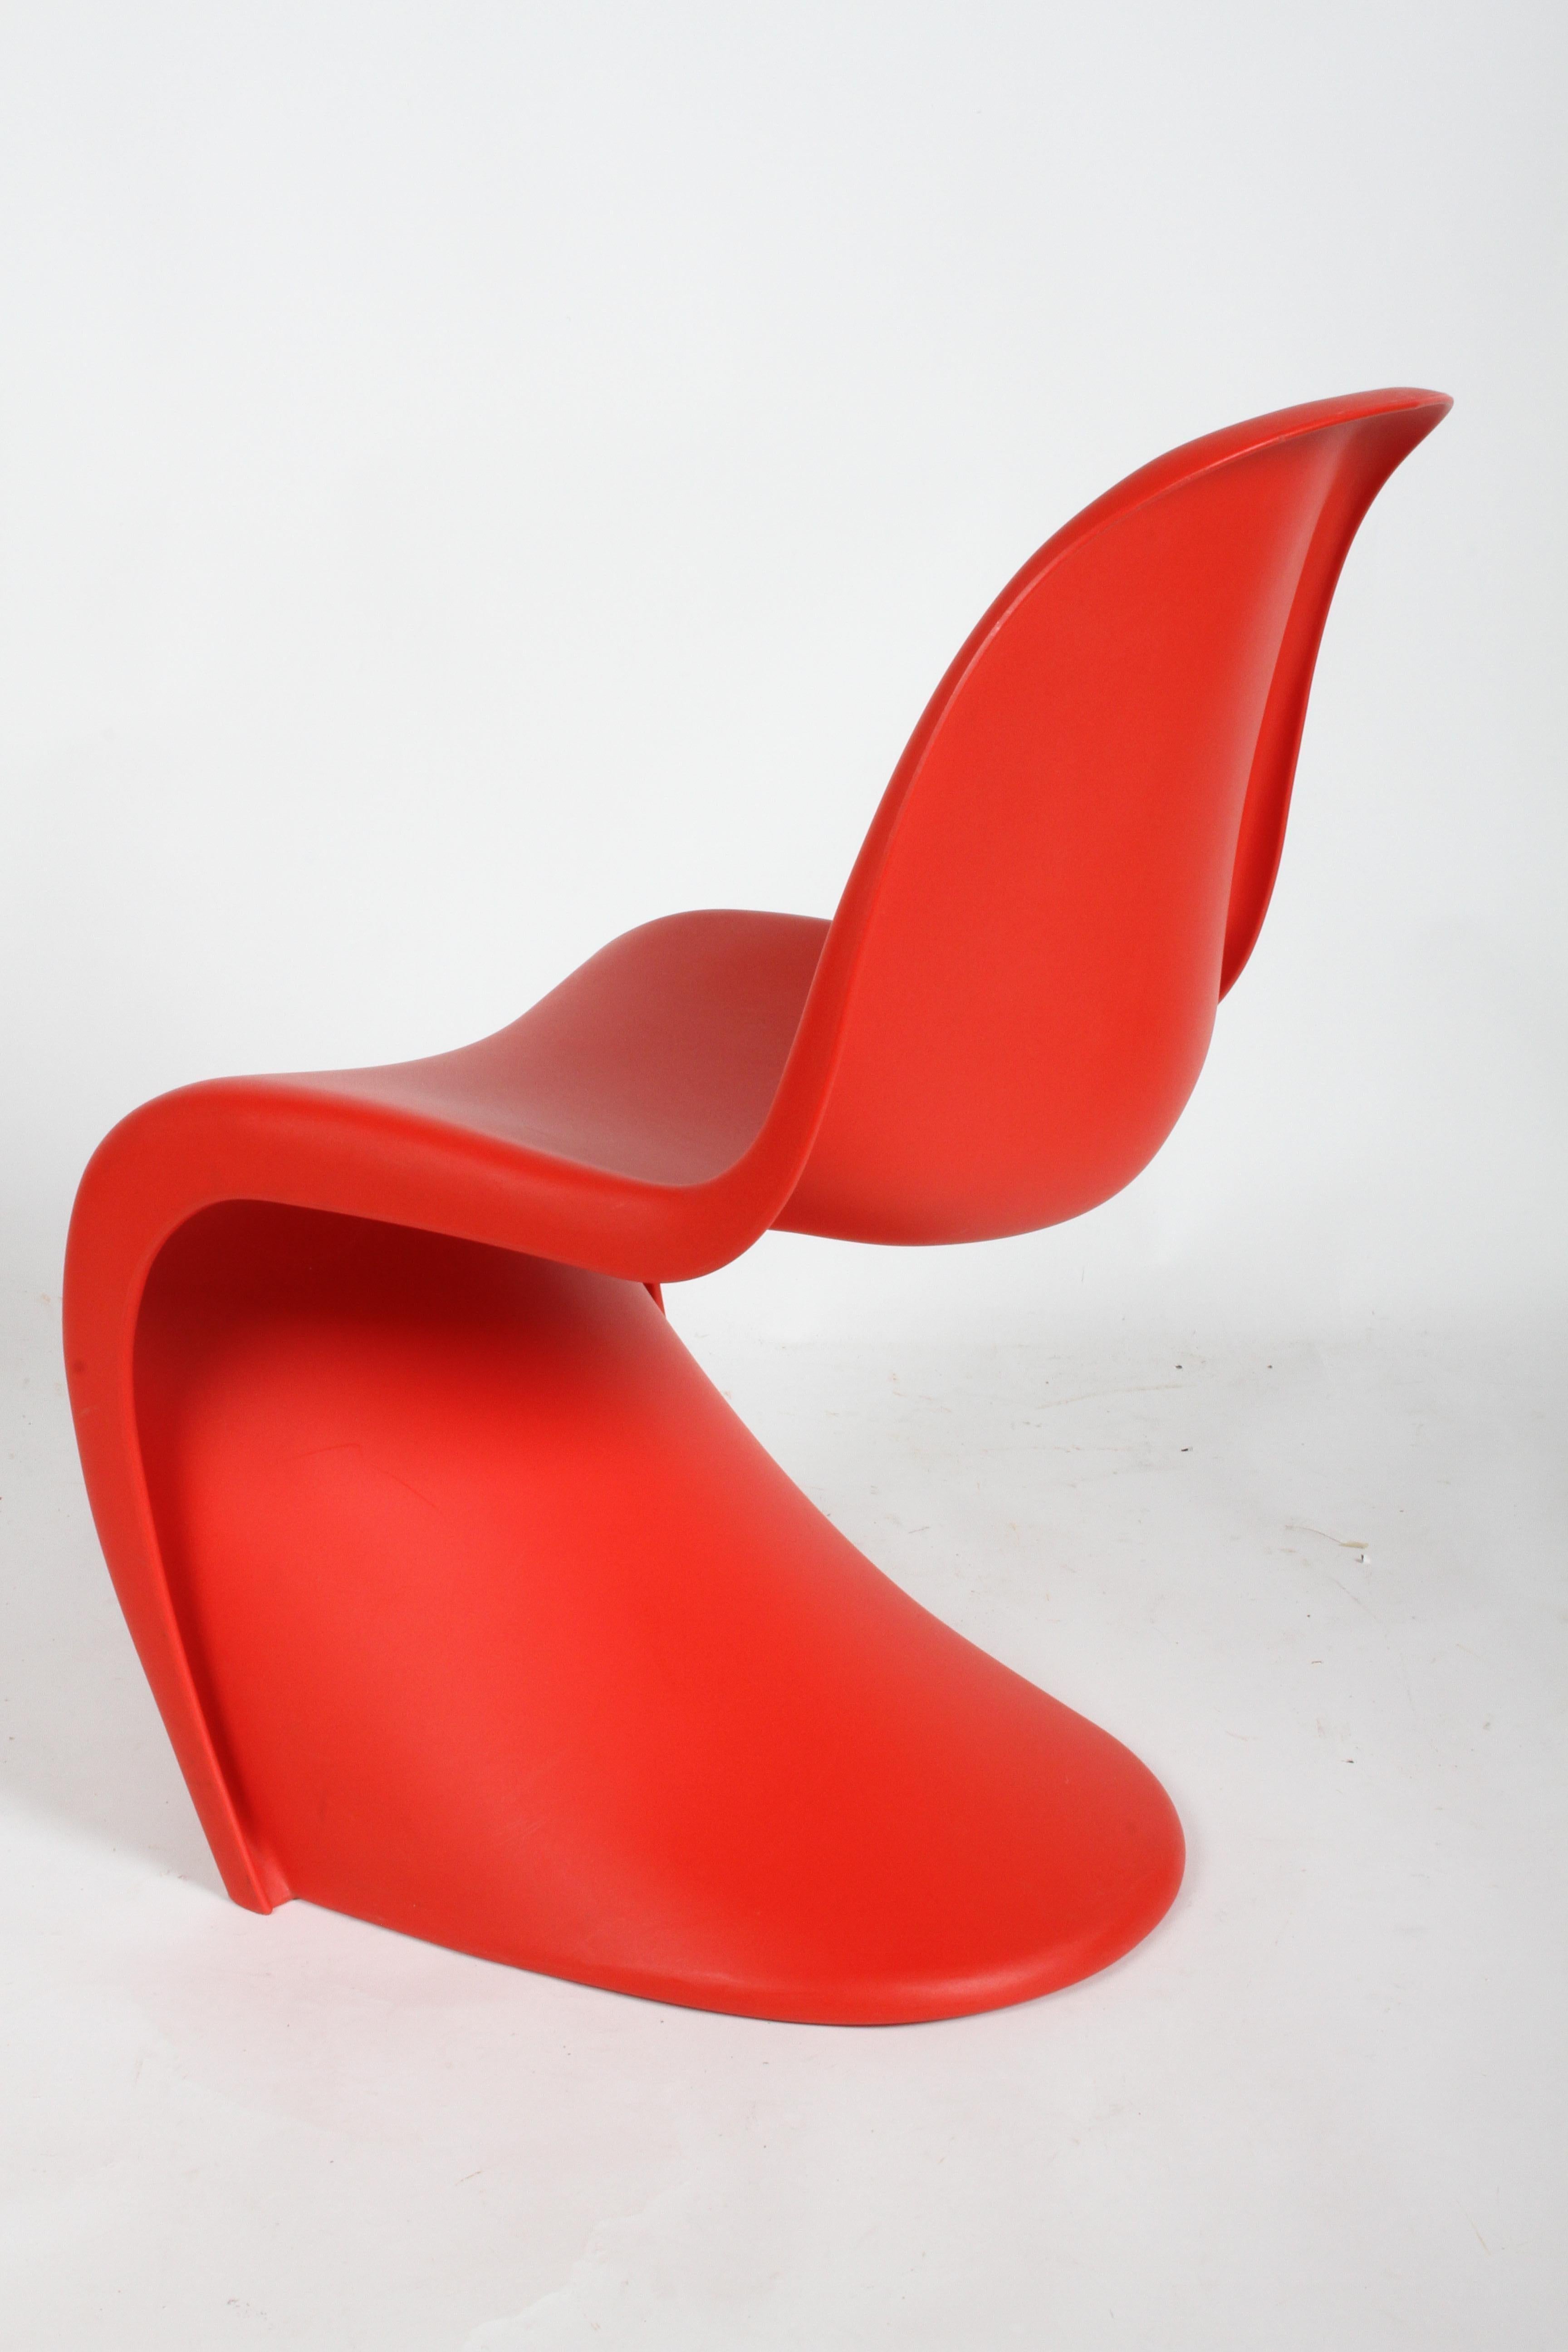 Classic Mid-Century Modern Verner Panton Chair in Red, Vitra Production 1